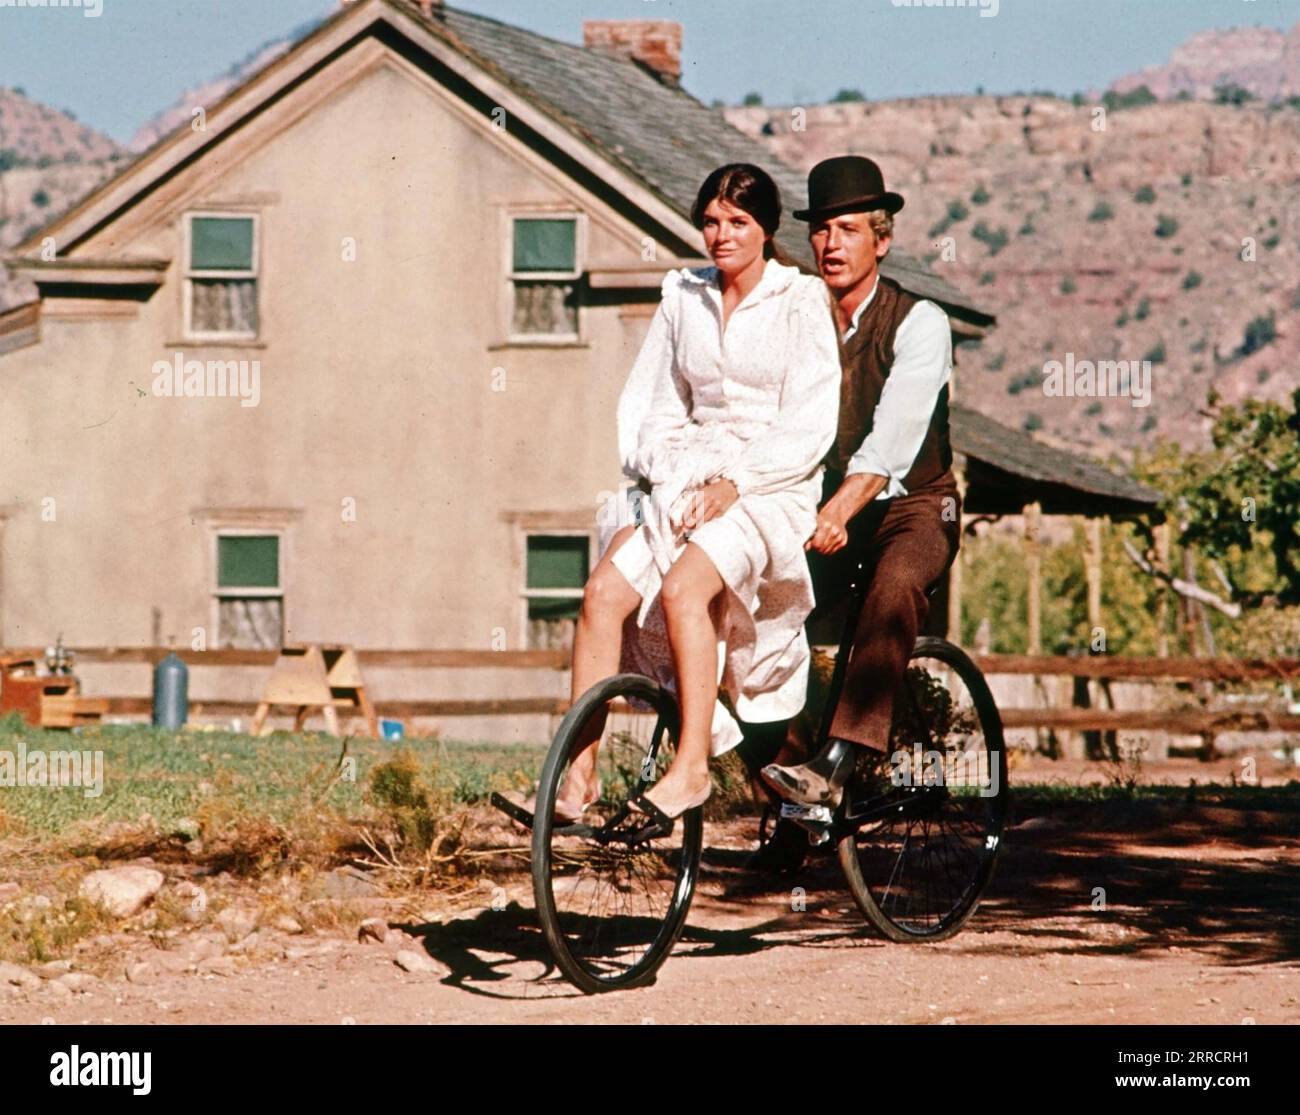 BUTCH CASSIDY AND THE SUNDANCE KID 1969 20th Century Fox film with Paul Newman and Katherine Ross Stock Photo